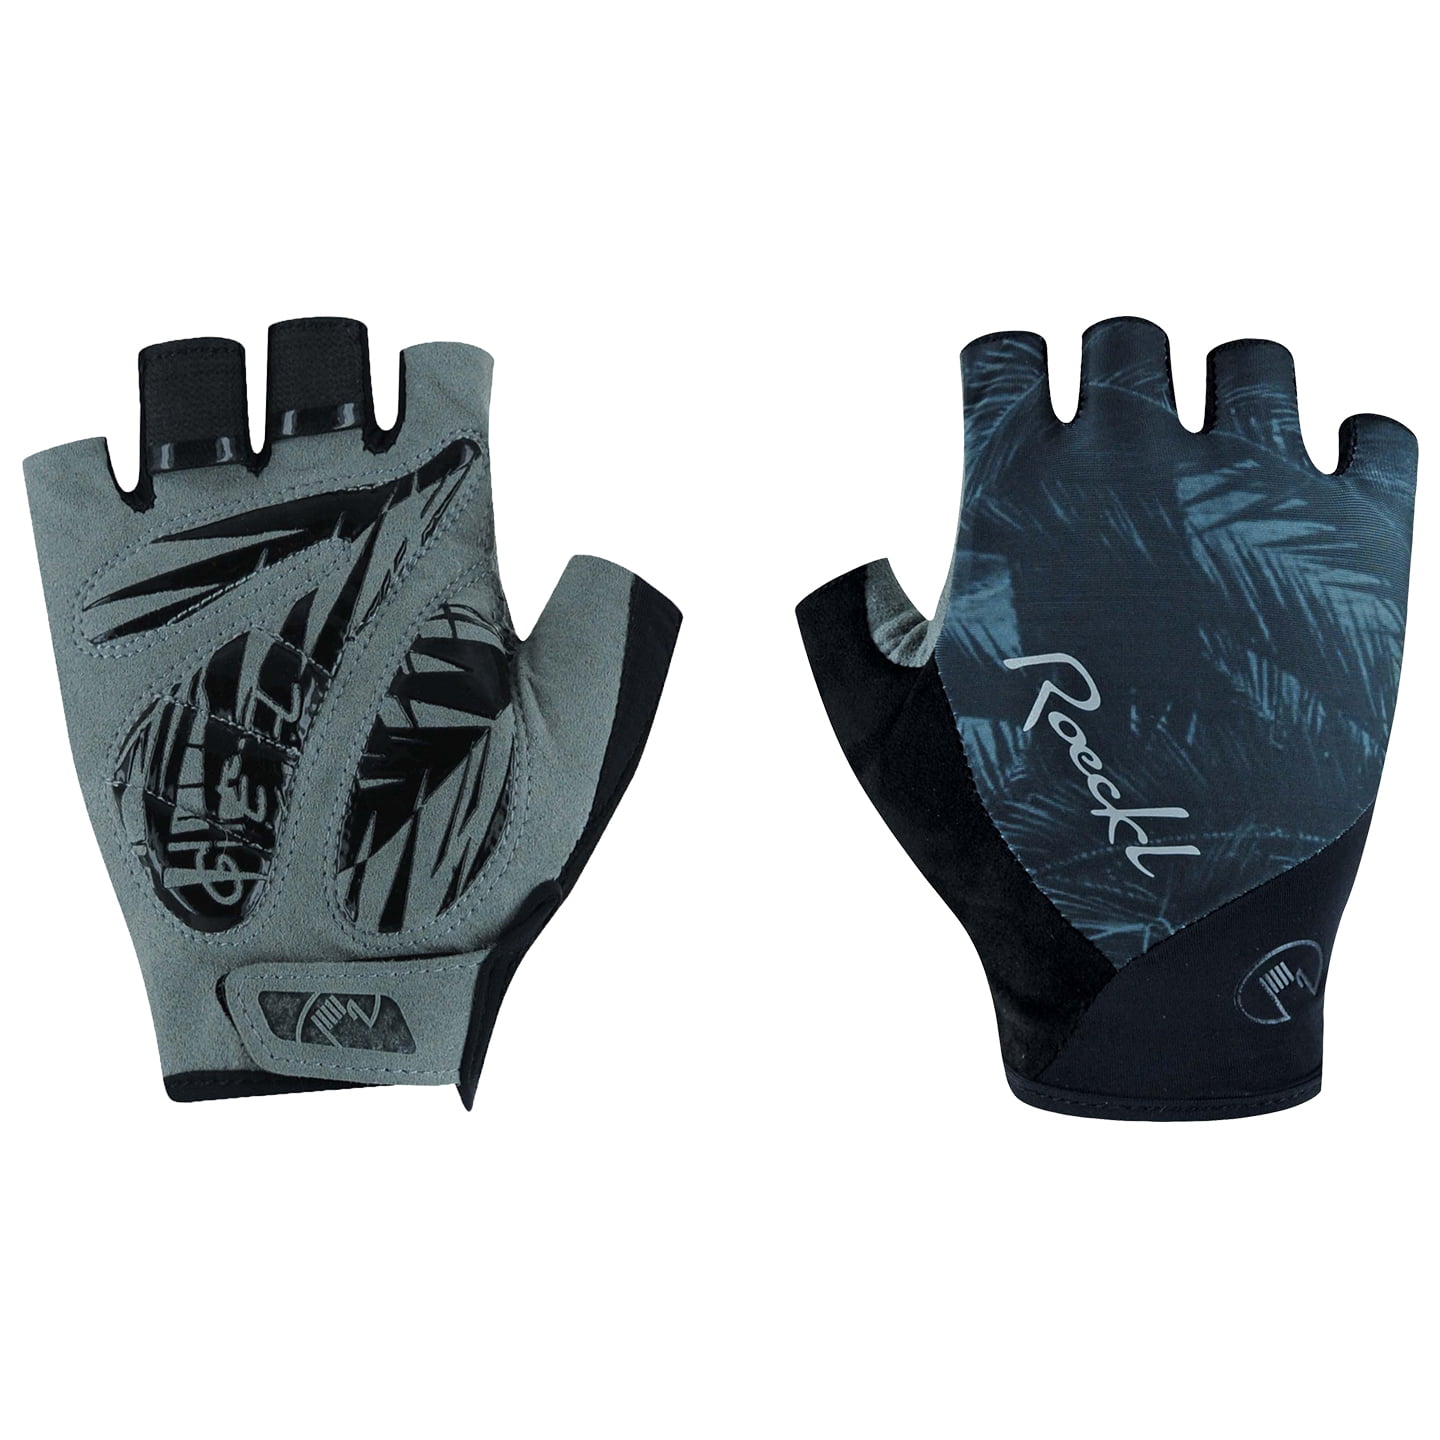 ROECKL Danis Women’s Gloves Women’s Cycling Gloves, size 6, Cycle gloves, Cycle wear